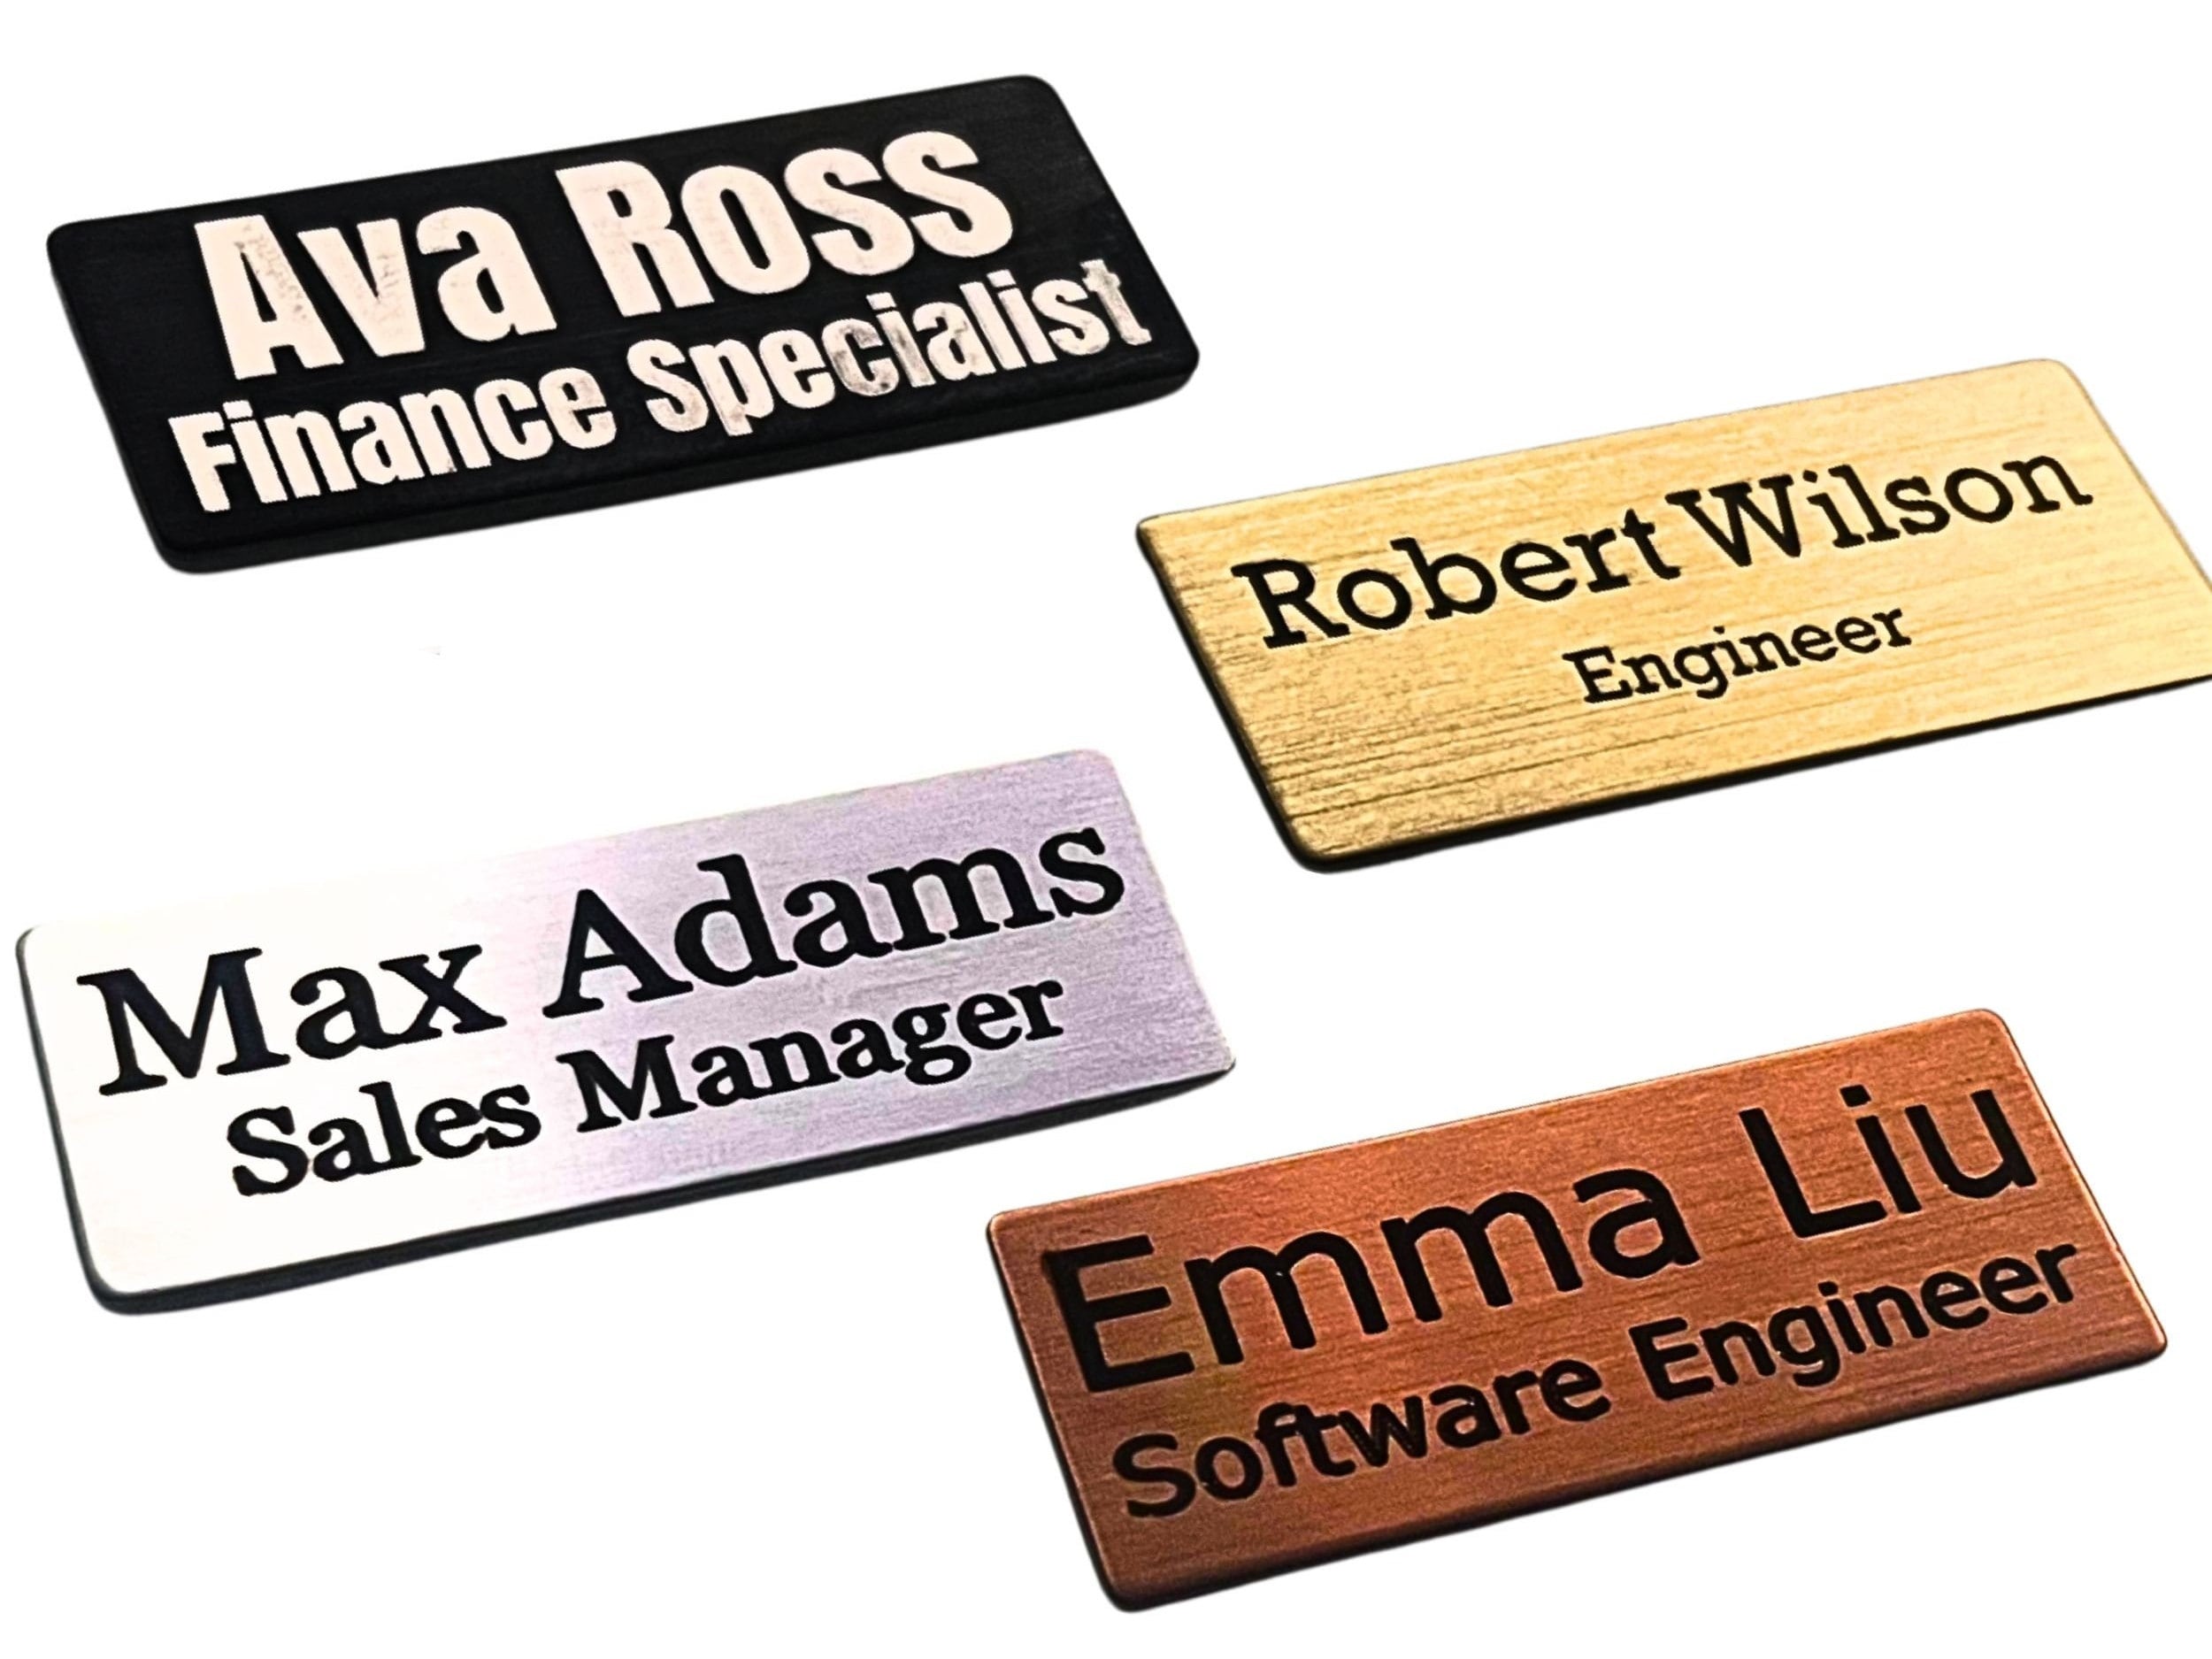 Metal Name Tags with Engraved Text